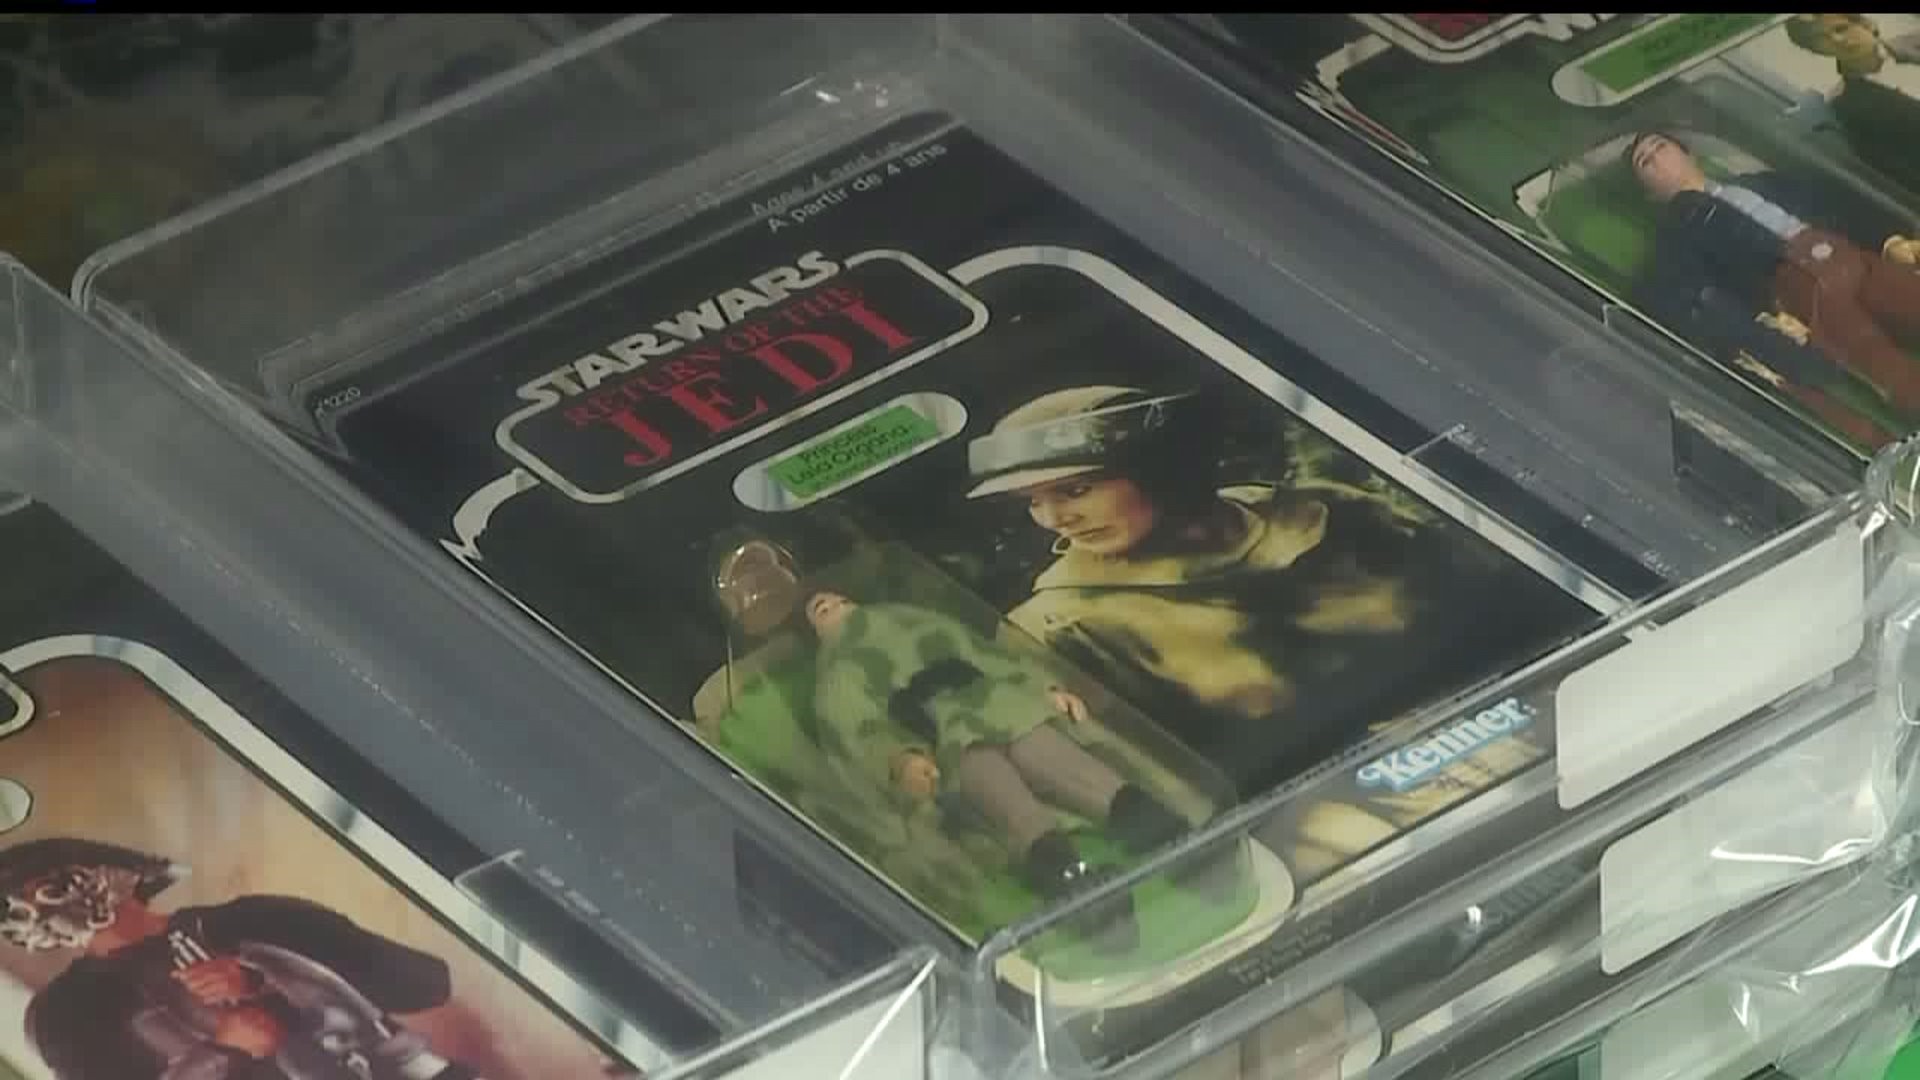 York County auction house making "record" sales on Star Wars items